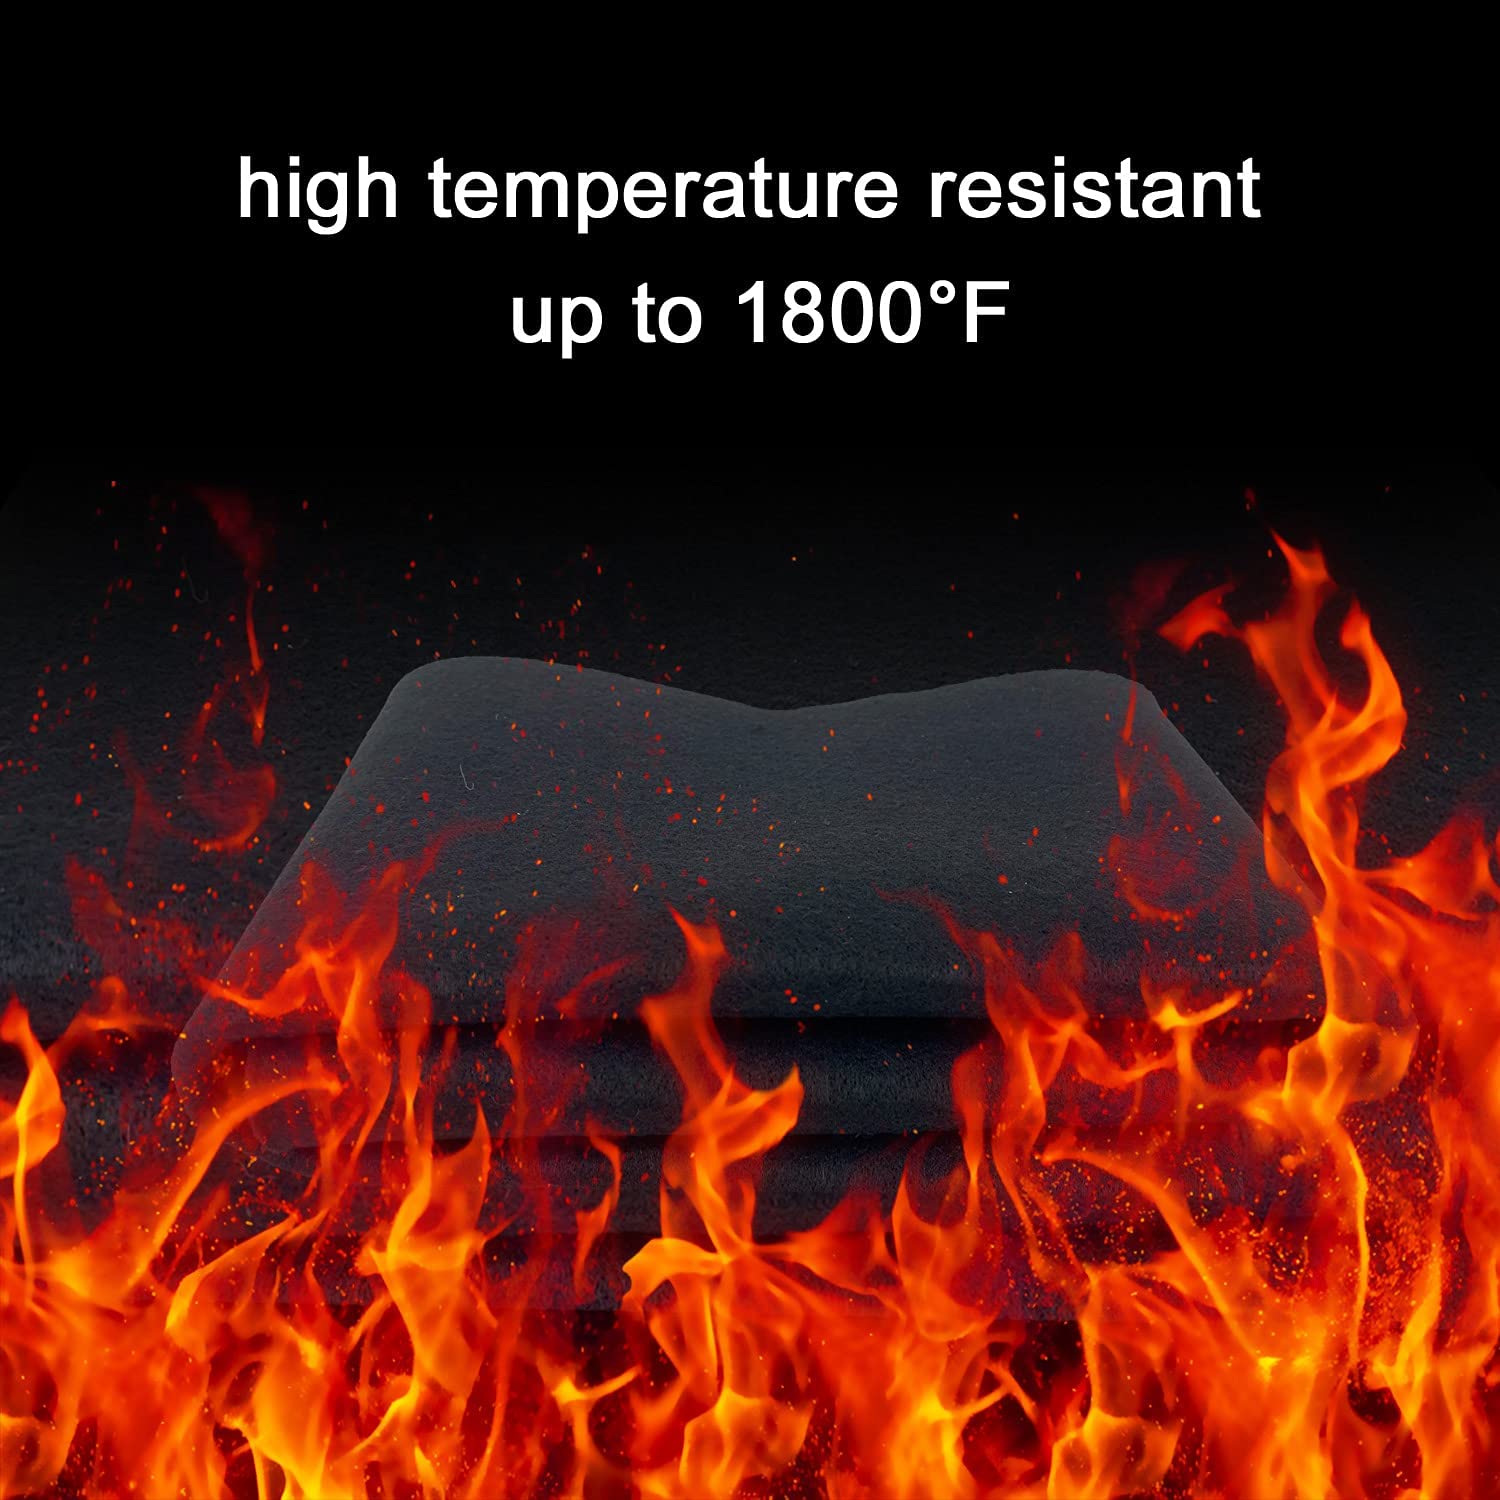 LU-DILAUNK Welding Blanket High Temperature Resistant up to 1800°F Fireproof Fabric Protect from Fire Heat Spark Protection Welding Pad Fireproof Mat